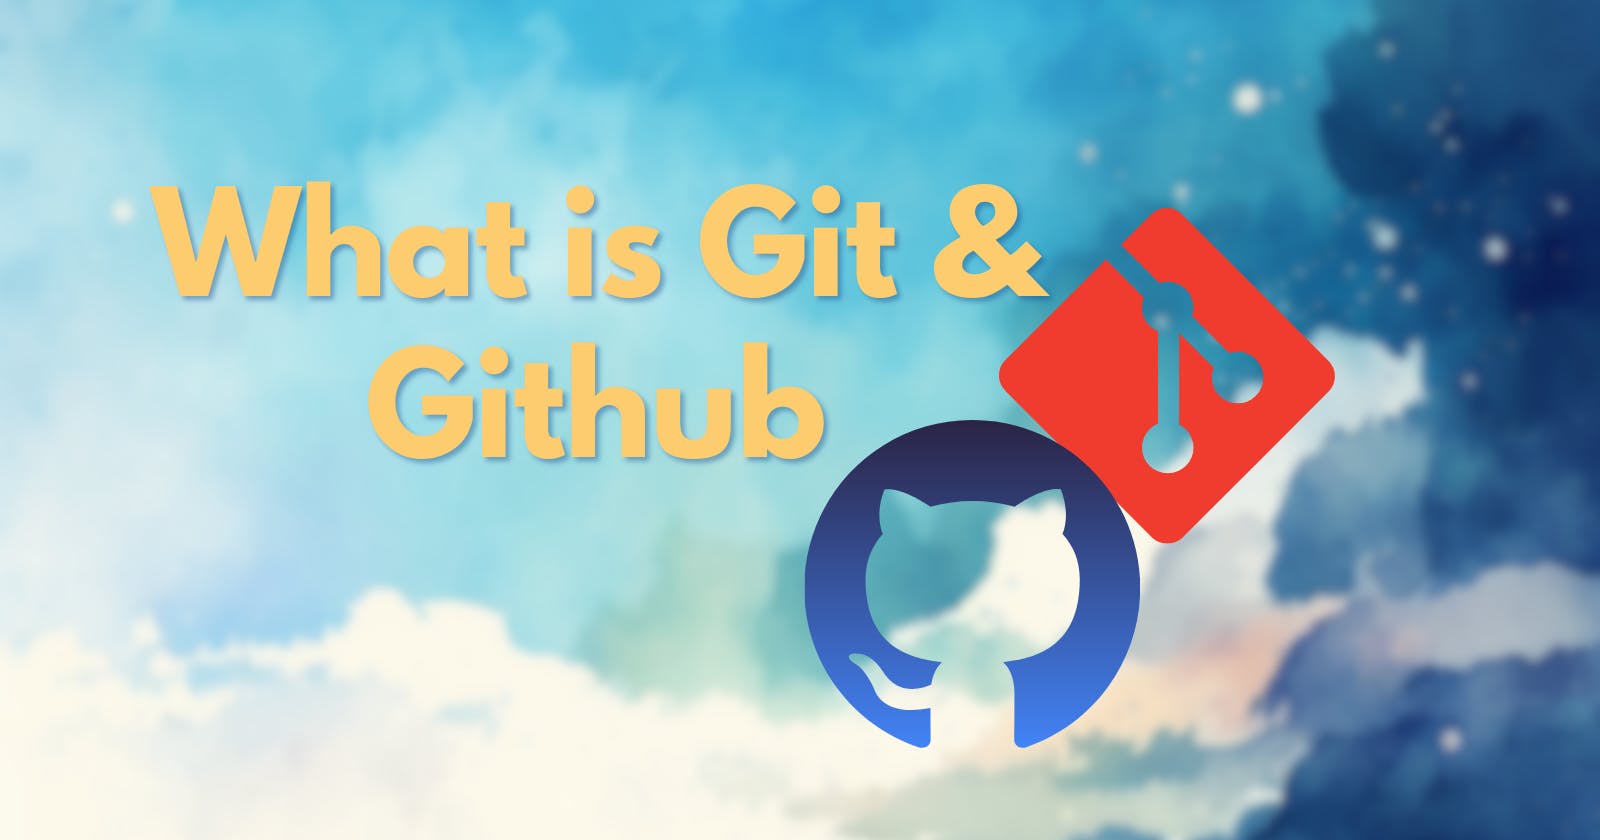 How Git and GitHub Have Transformed the Way We Build and Collaborate